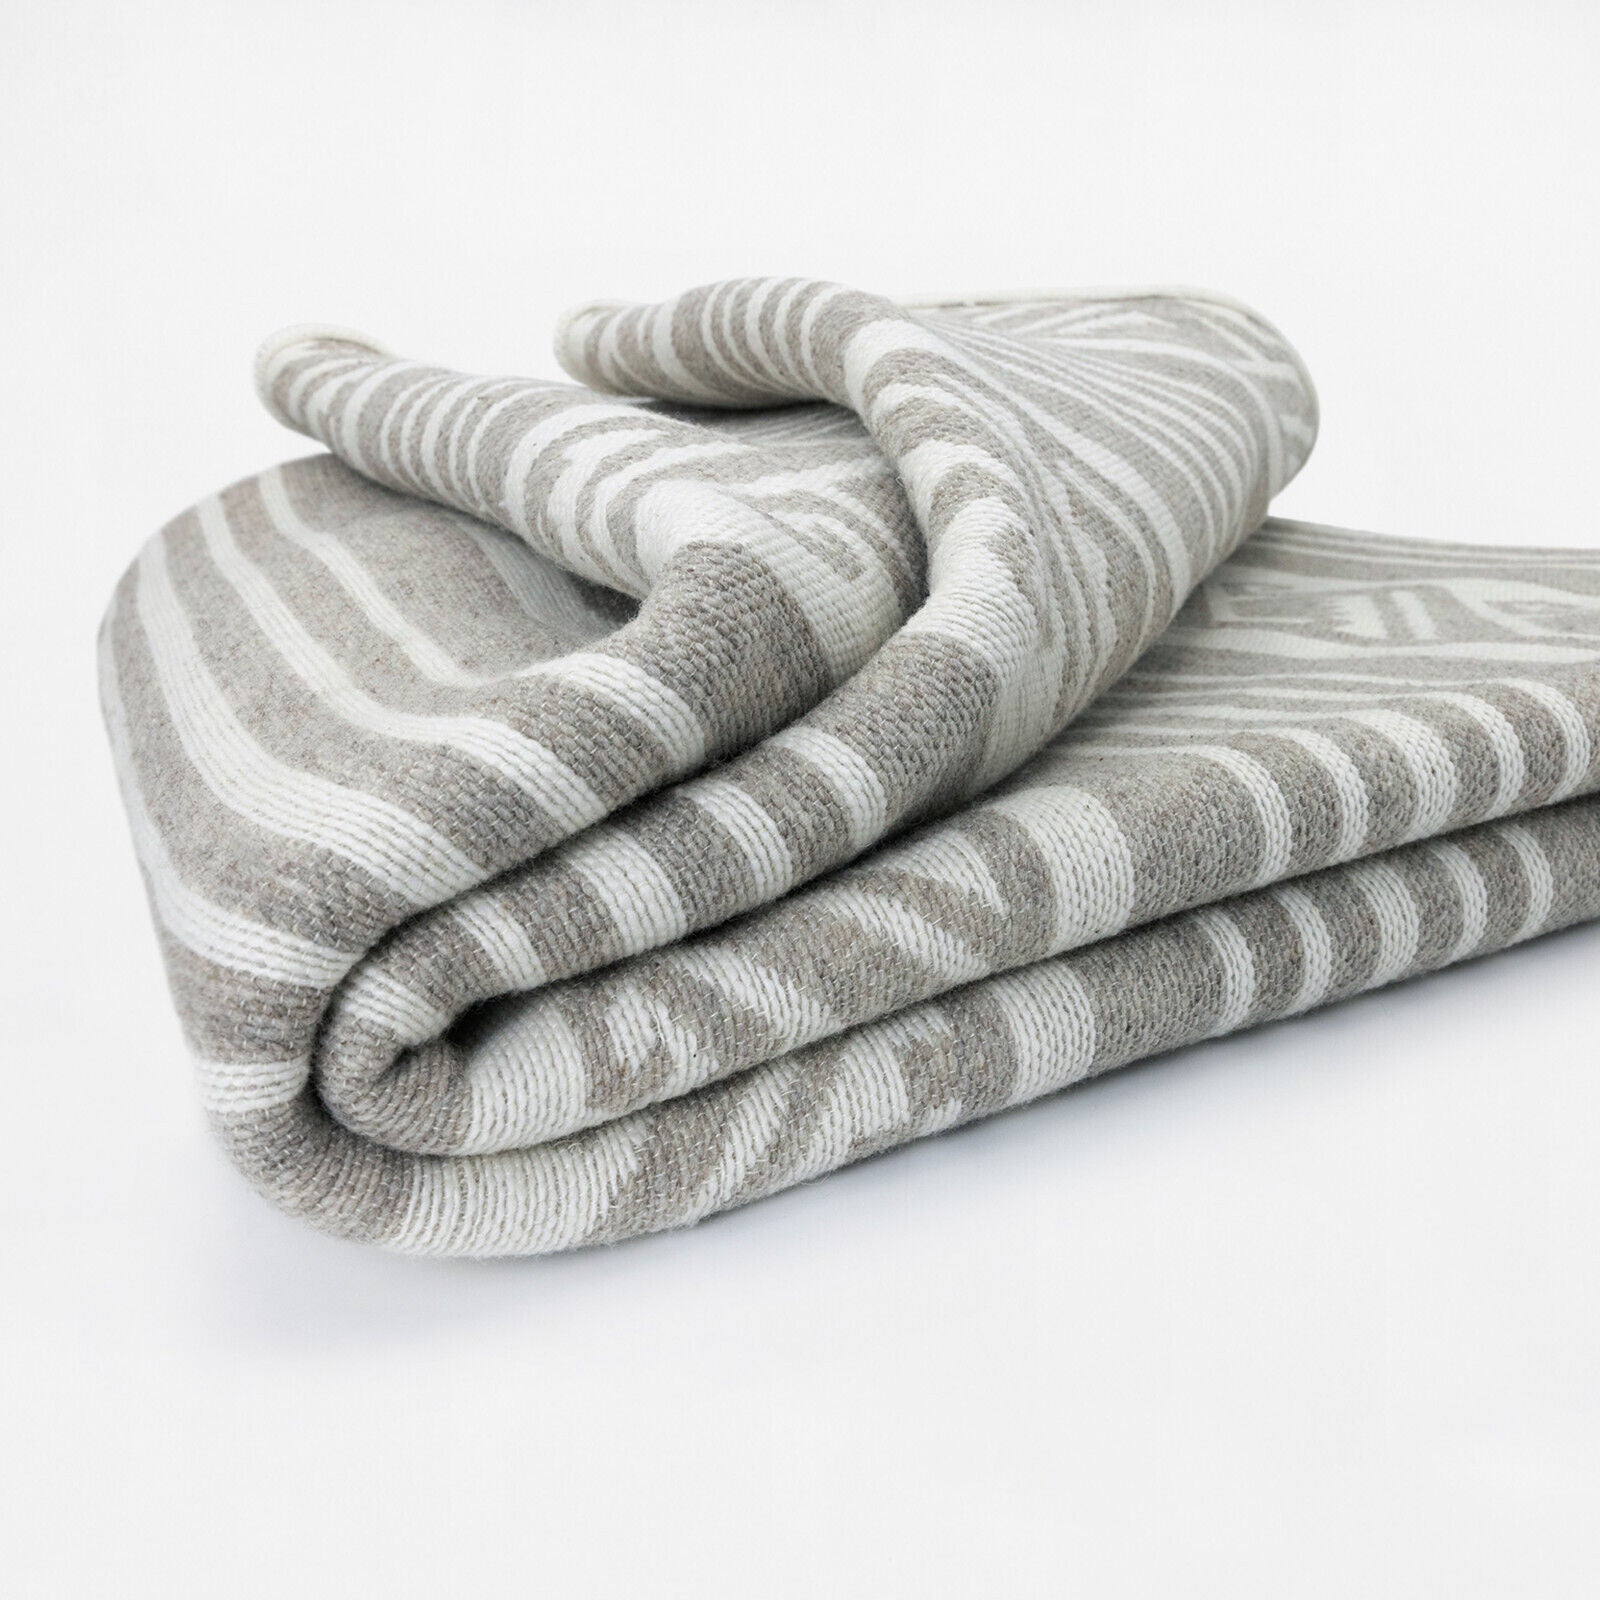 Tivacuno - Heavy and Thick Extra Large Llama wool artisanal handwoven Blanket - Ivory/Gray - Aztec Wave Pattern